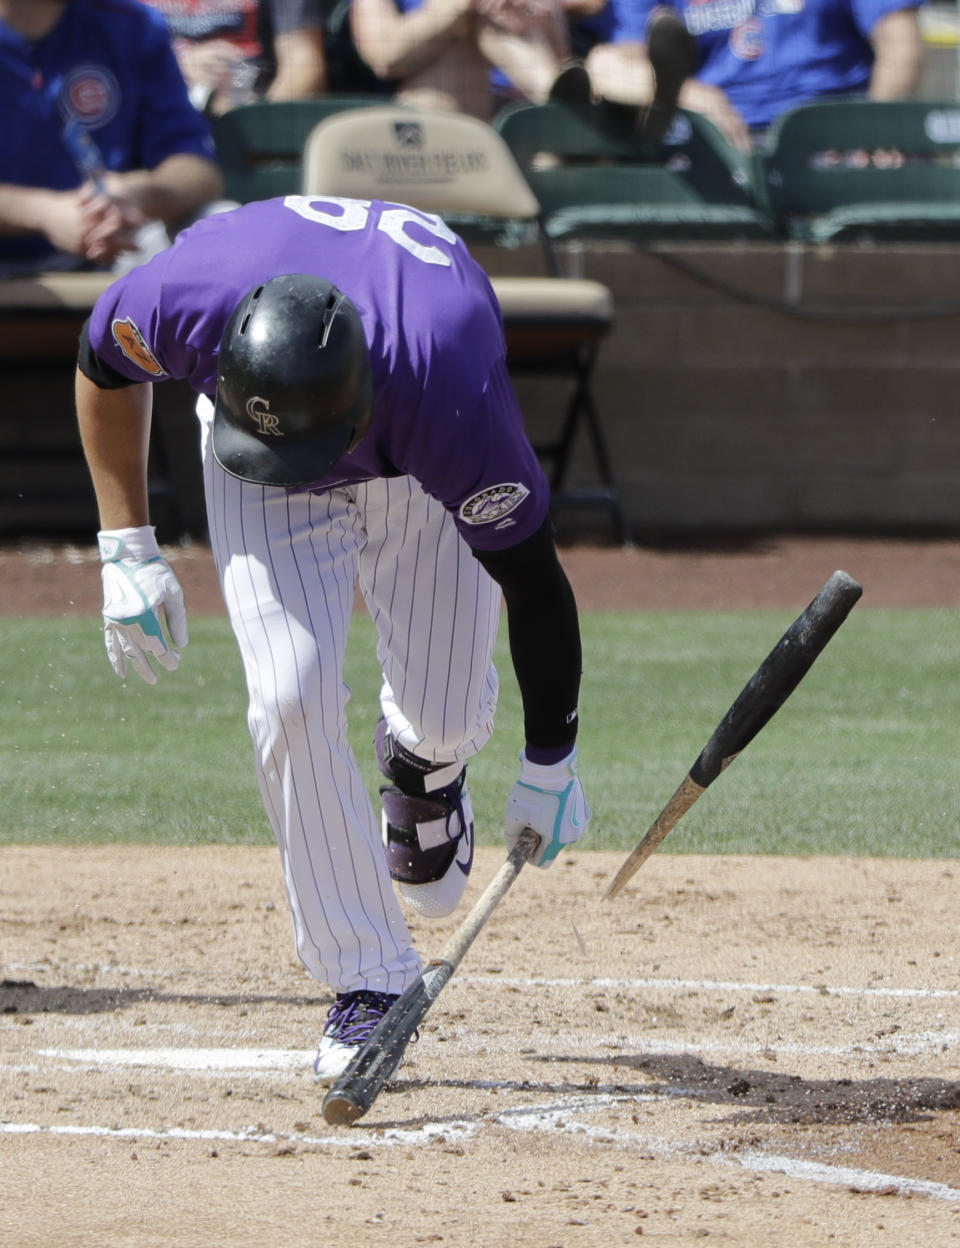 Colorado Rockies' Nolan Arenado breaks his bat after flying out during the third inning of a spring training baseball game against the Chicago Cubs, Saturday, March 25, 2017, in Scottsdale, Ariz. (AP Photo/Darron Cummings)